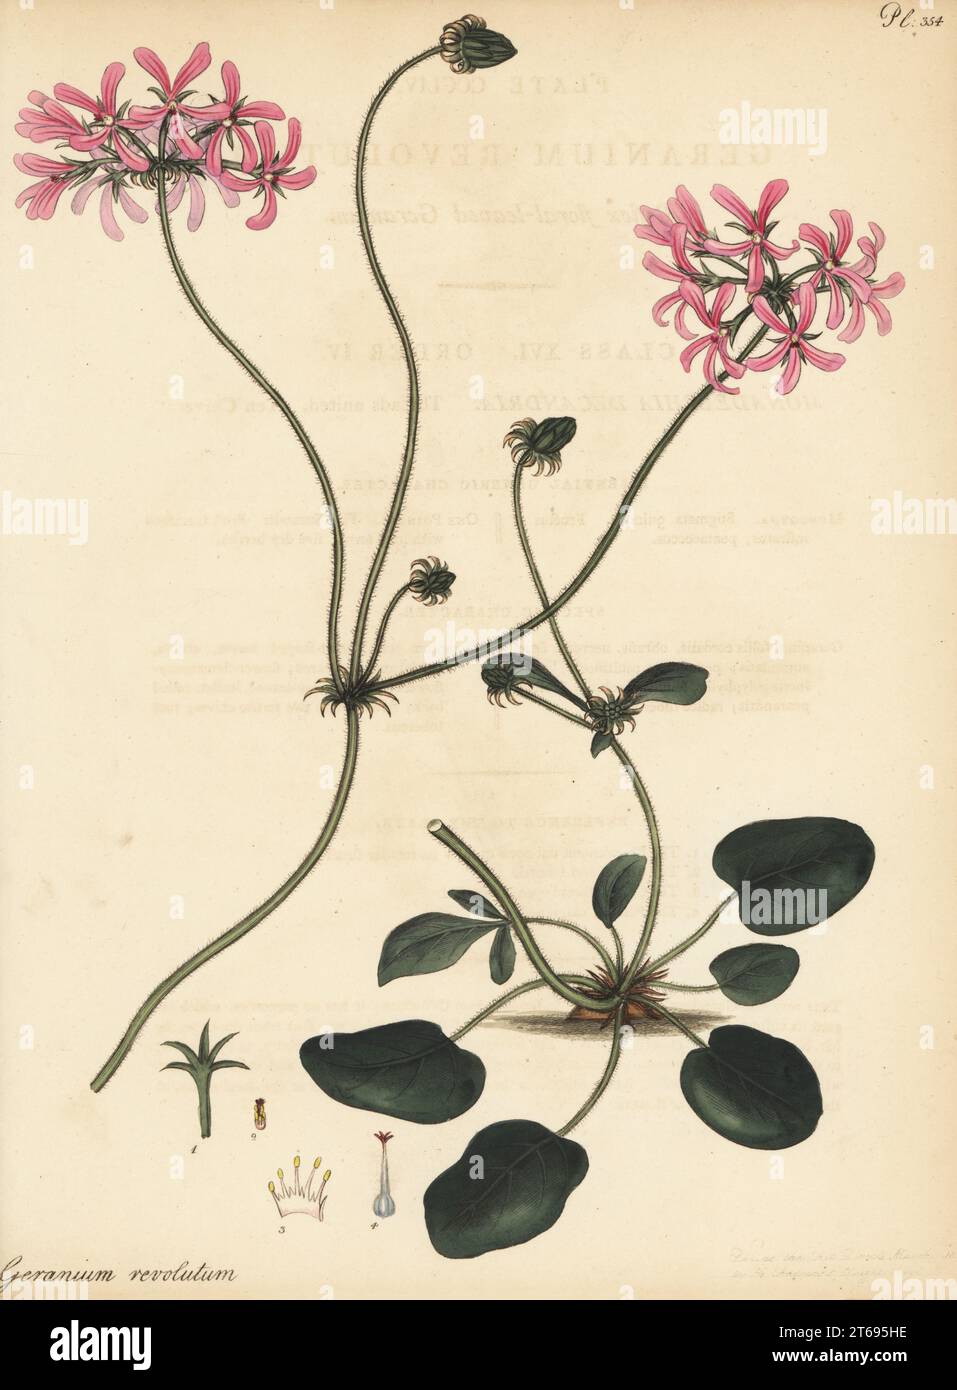 Pelargonium chelidonium. Reflex floral-leaved geranium, Geranium revolutum. From the Cape, South Africa, in the Clapham Collection. Copperplate engraving drawn, engraved and hand-coloured by Henry Andrews from his Botanical Register, Volume 5, self-published in Knightsbridge, London, 1804. Stock Photo